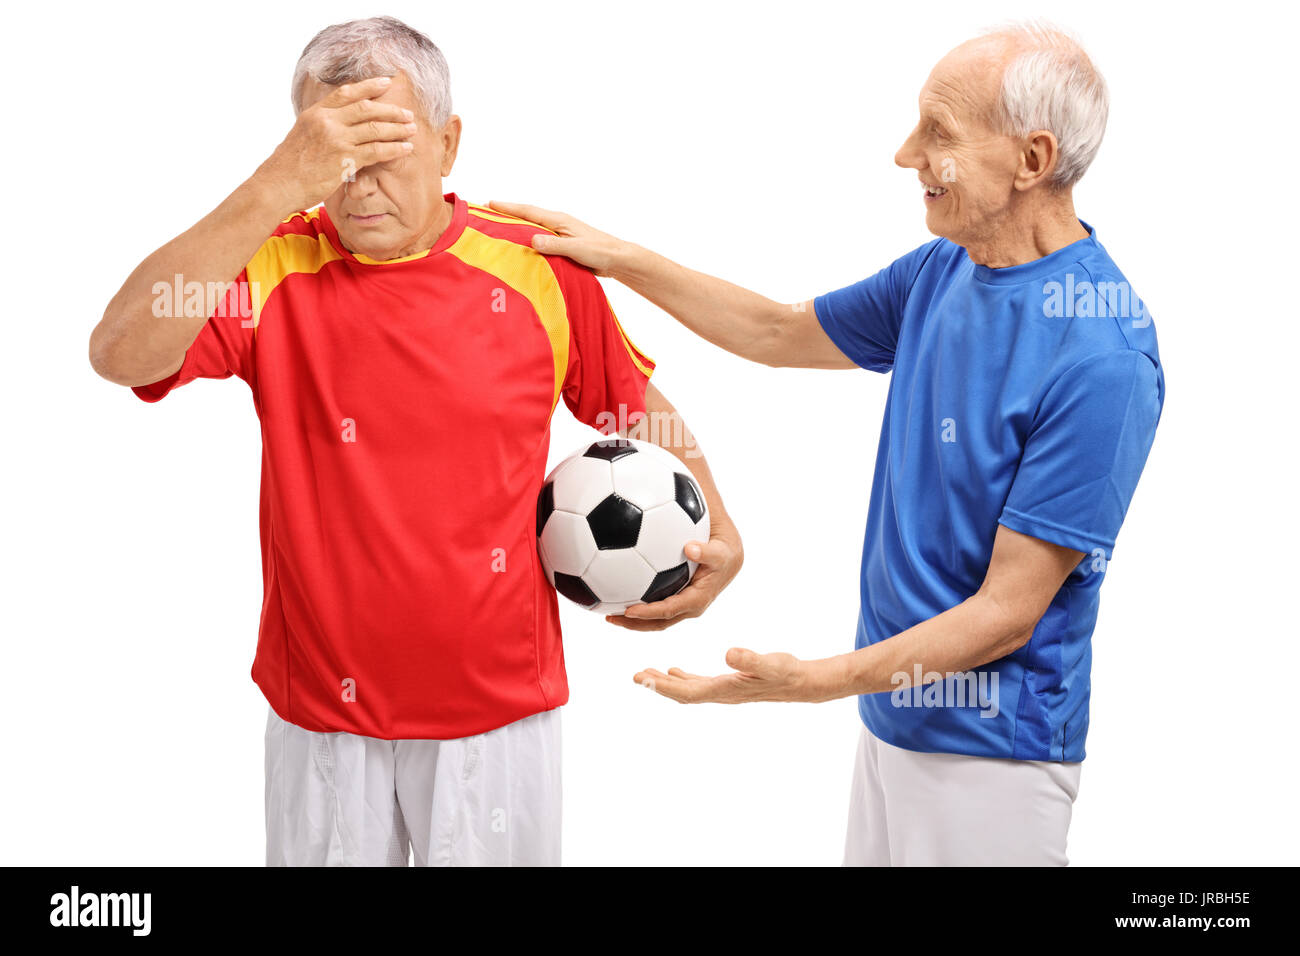 Elderly soccer player consoling another player isolated on white background Stock Photo